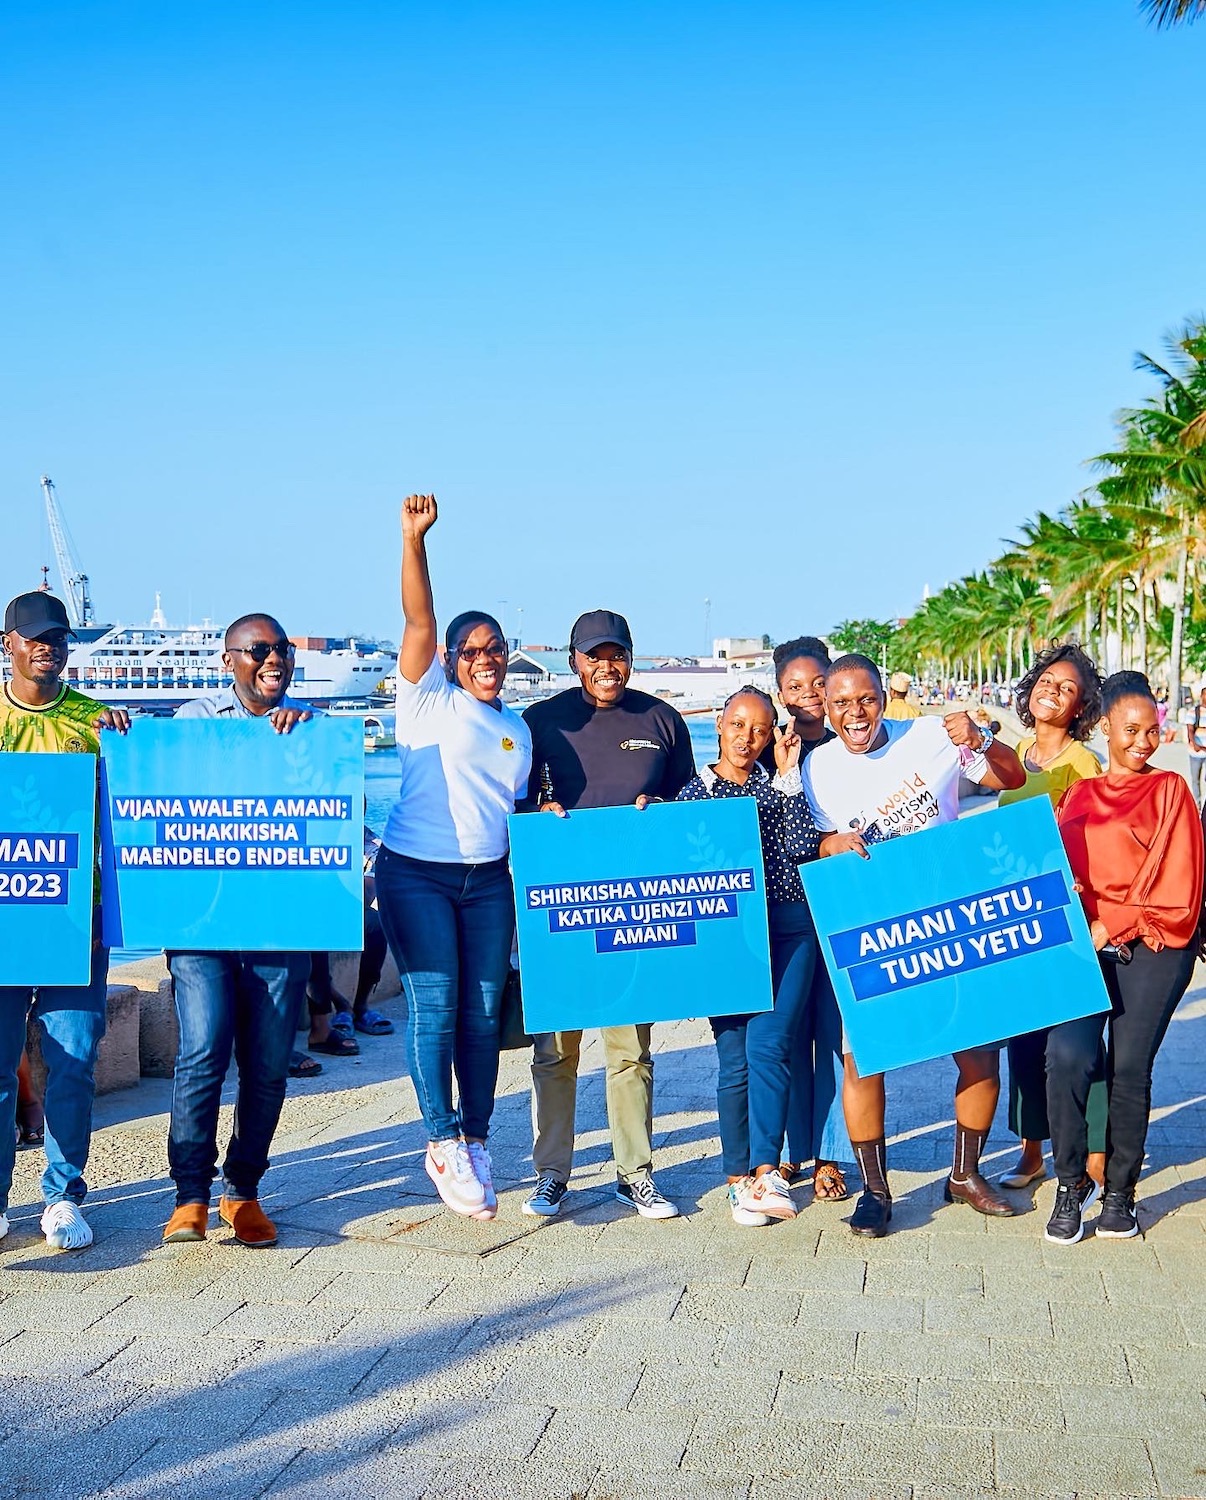 A group of people holding blue signs in Tanzania.